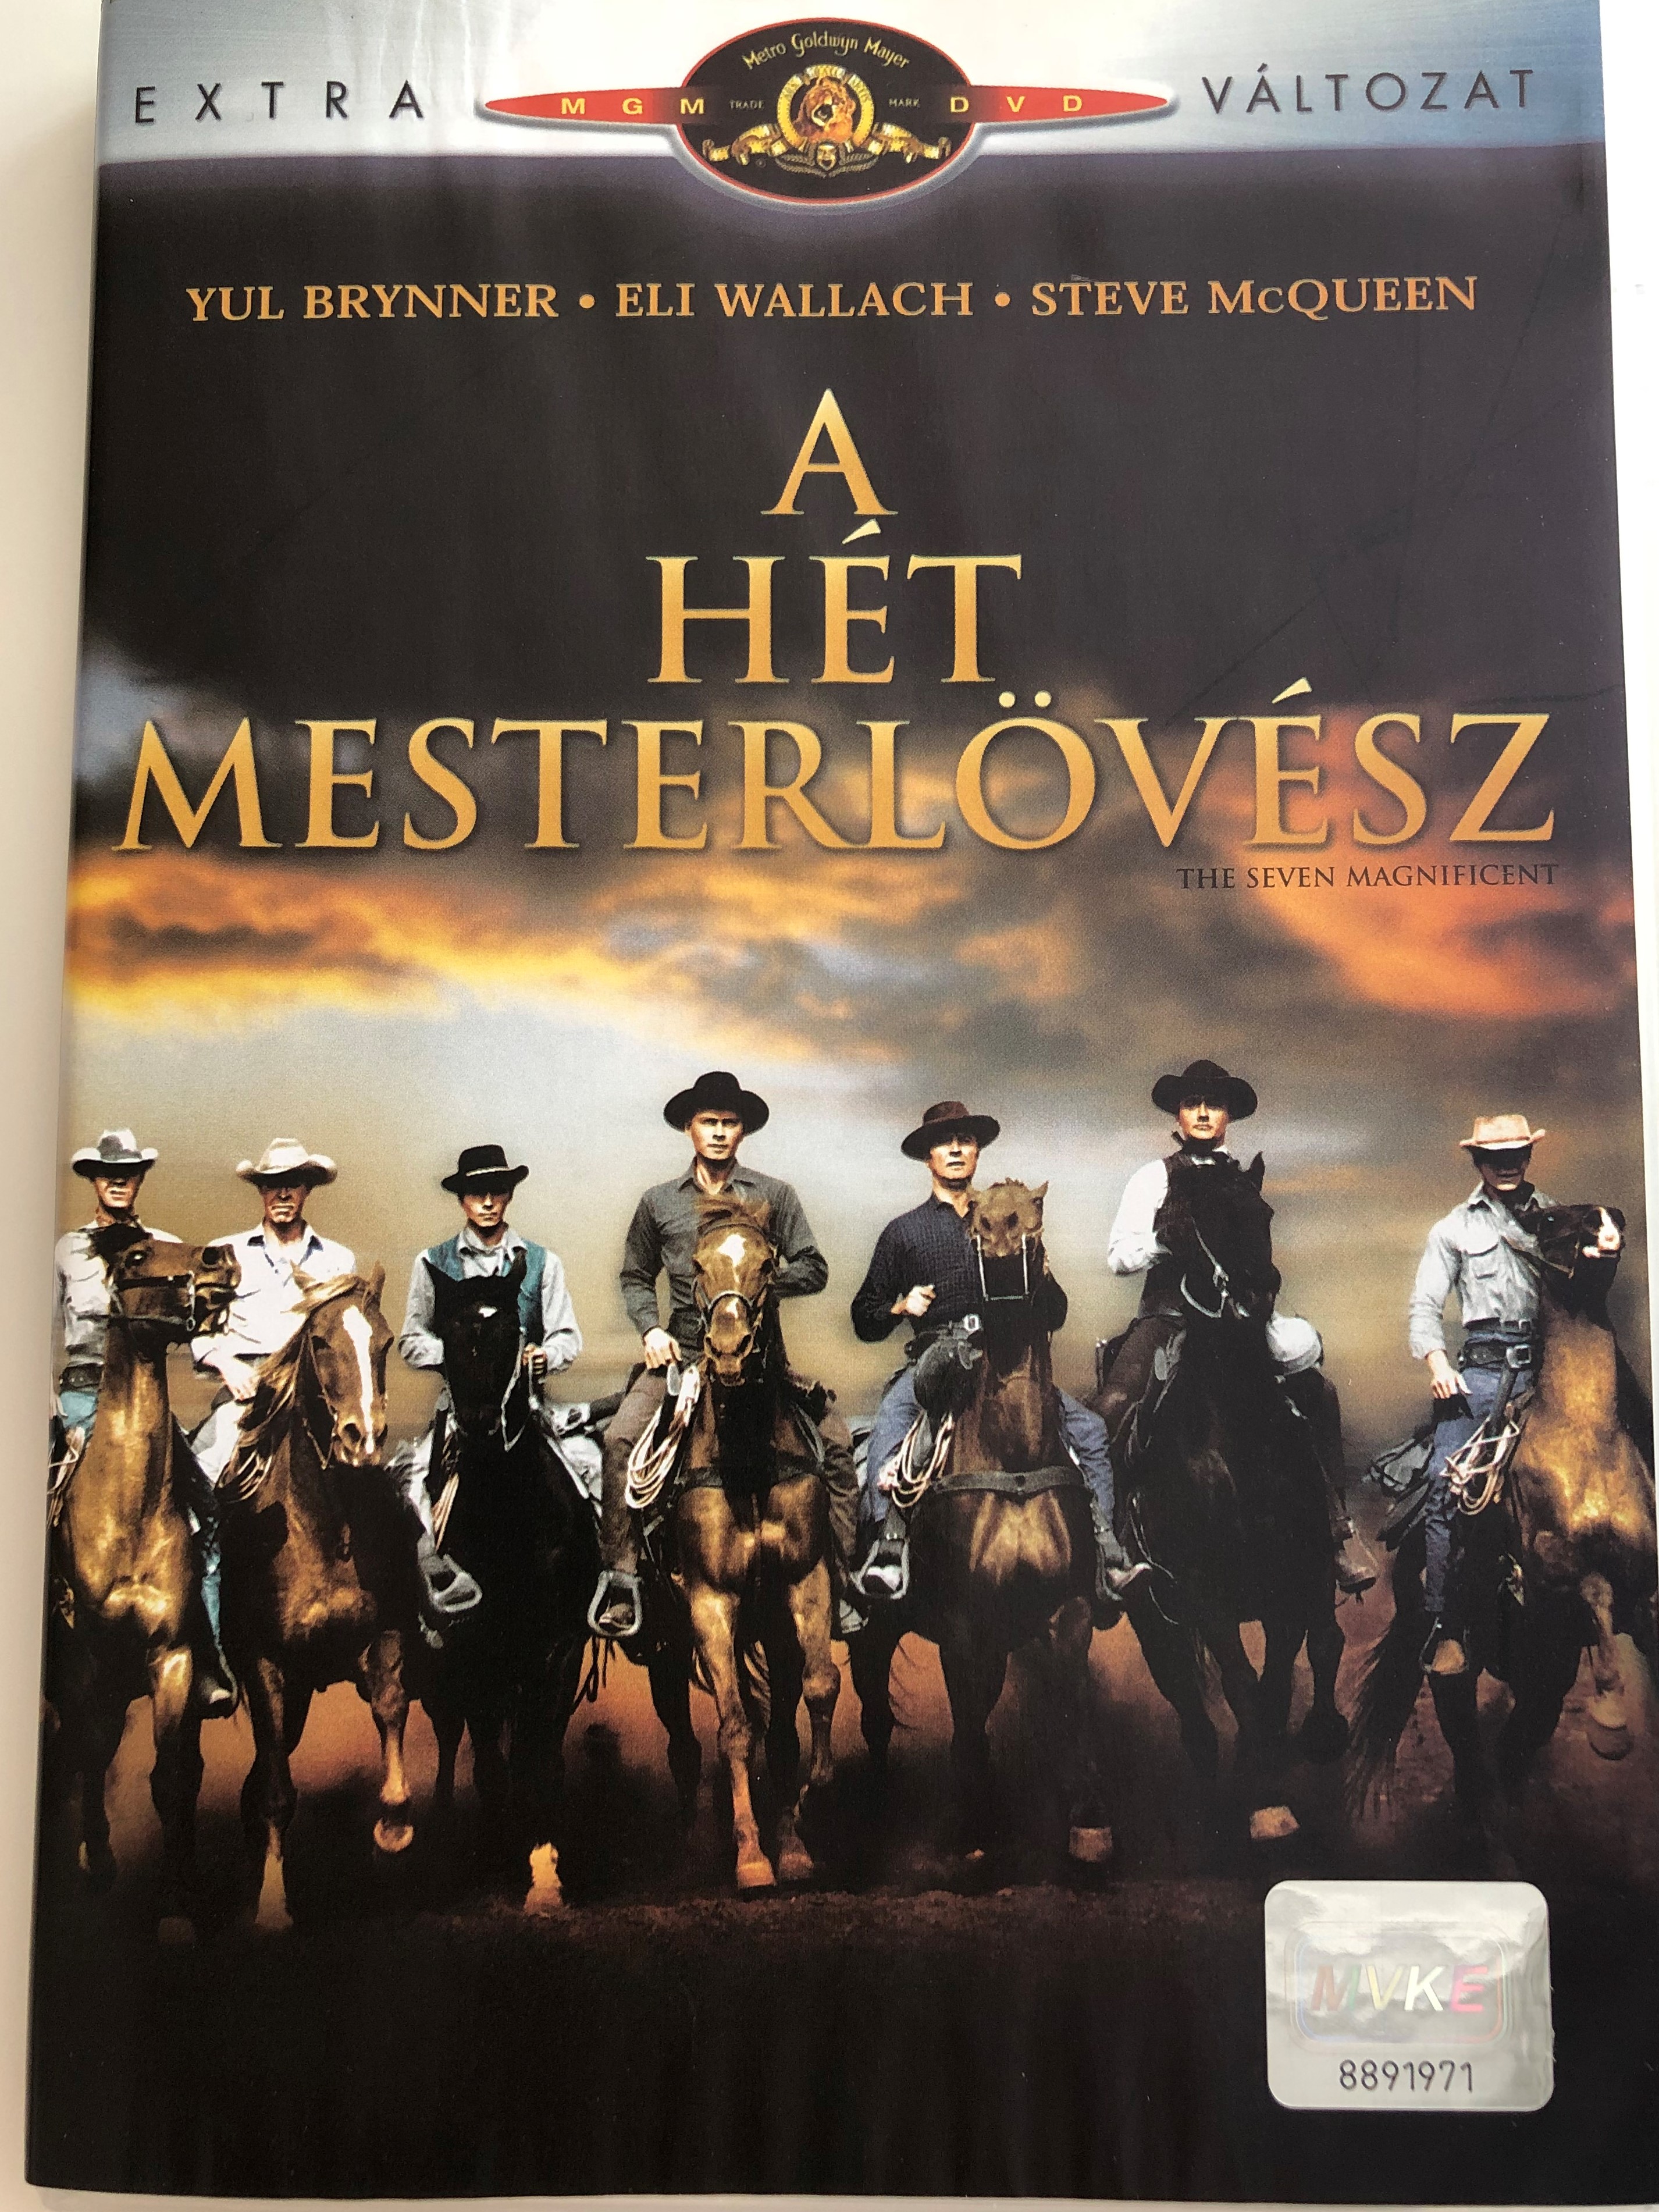 the-magnificent-seven-dvd-1960-a-h-t-mesterl-v-sz-directed-by-john-sturges-starring-yul-brynner-eli-wallach-steve-mcqueen-1-.jpg